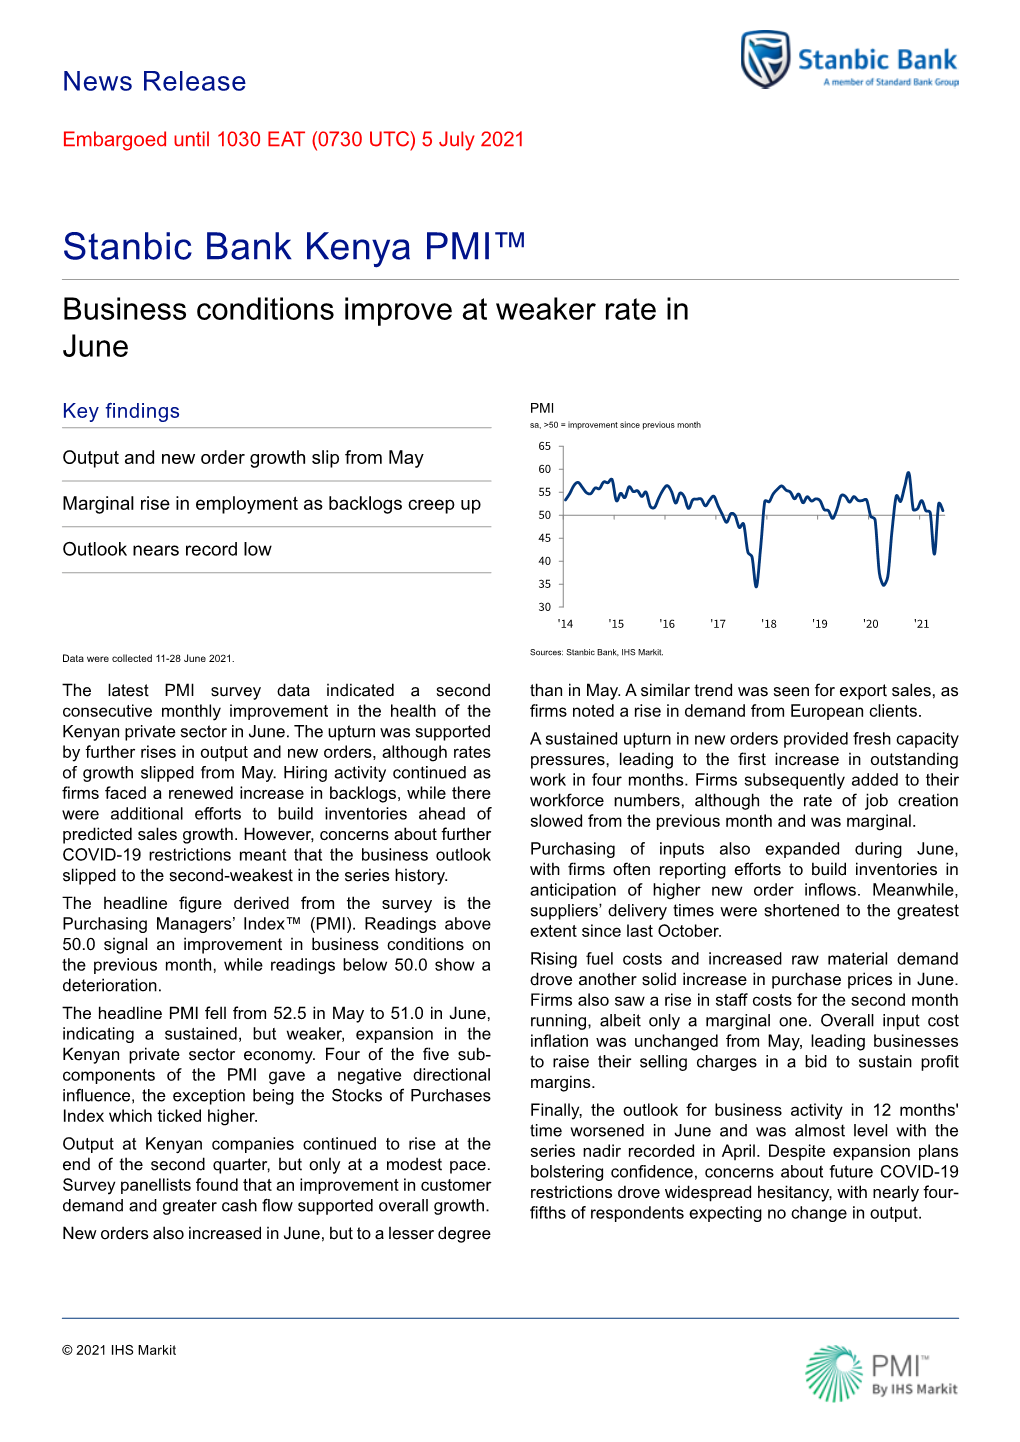 Stanbic Bank Kenya PMI™ Business Conditions Improve at Weaker Rate in June